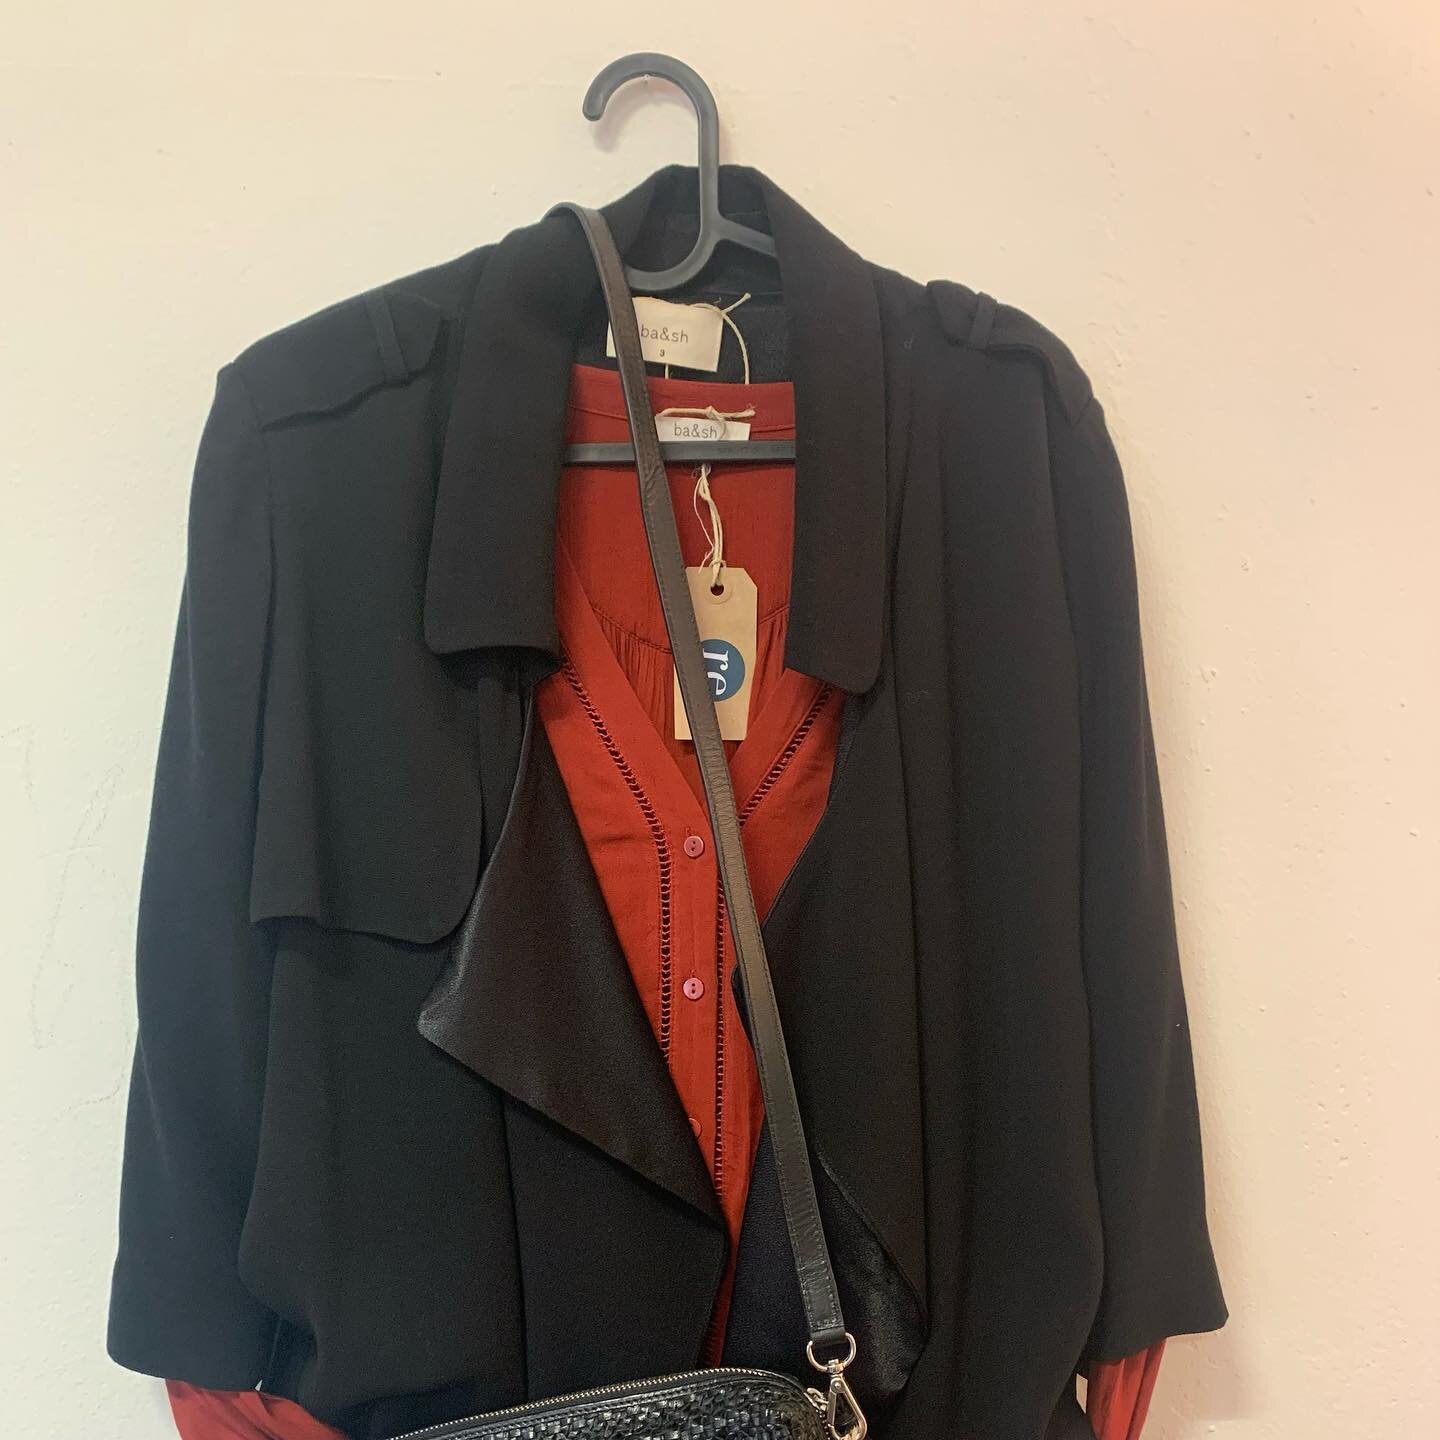 Cool chic at work 

Veste Ba&amp;Sh noire / CHF 84.-
Blouse Ba&amp;Sh  terre rouge / CHF 49.-
Pantalons Zadig &amp; Voltaire / CHF 79.- 
Sac Vabeene noir / CHF 89.-
Chaussures Brunate noires / CHF 139.- 
.
.
.

#revive #reviveforgood #betterclothesfo